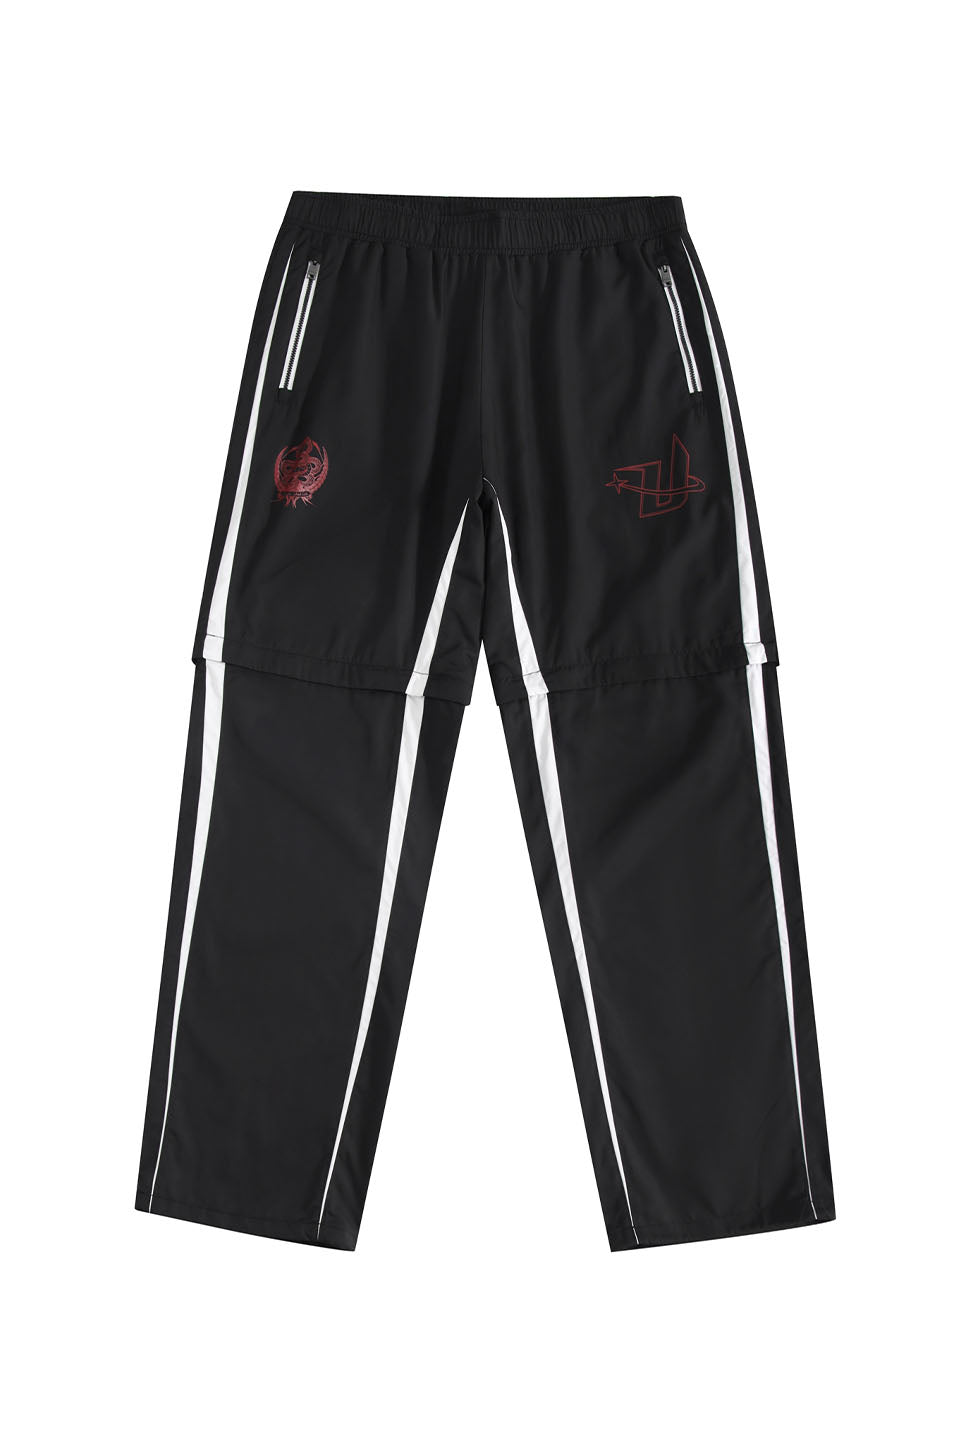 y40%OFF Unknown LondonzTech Zip Off Technical Sport Pants Xg[g t@bV qbvzbv _X 傫TCY  gh Y fB[X